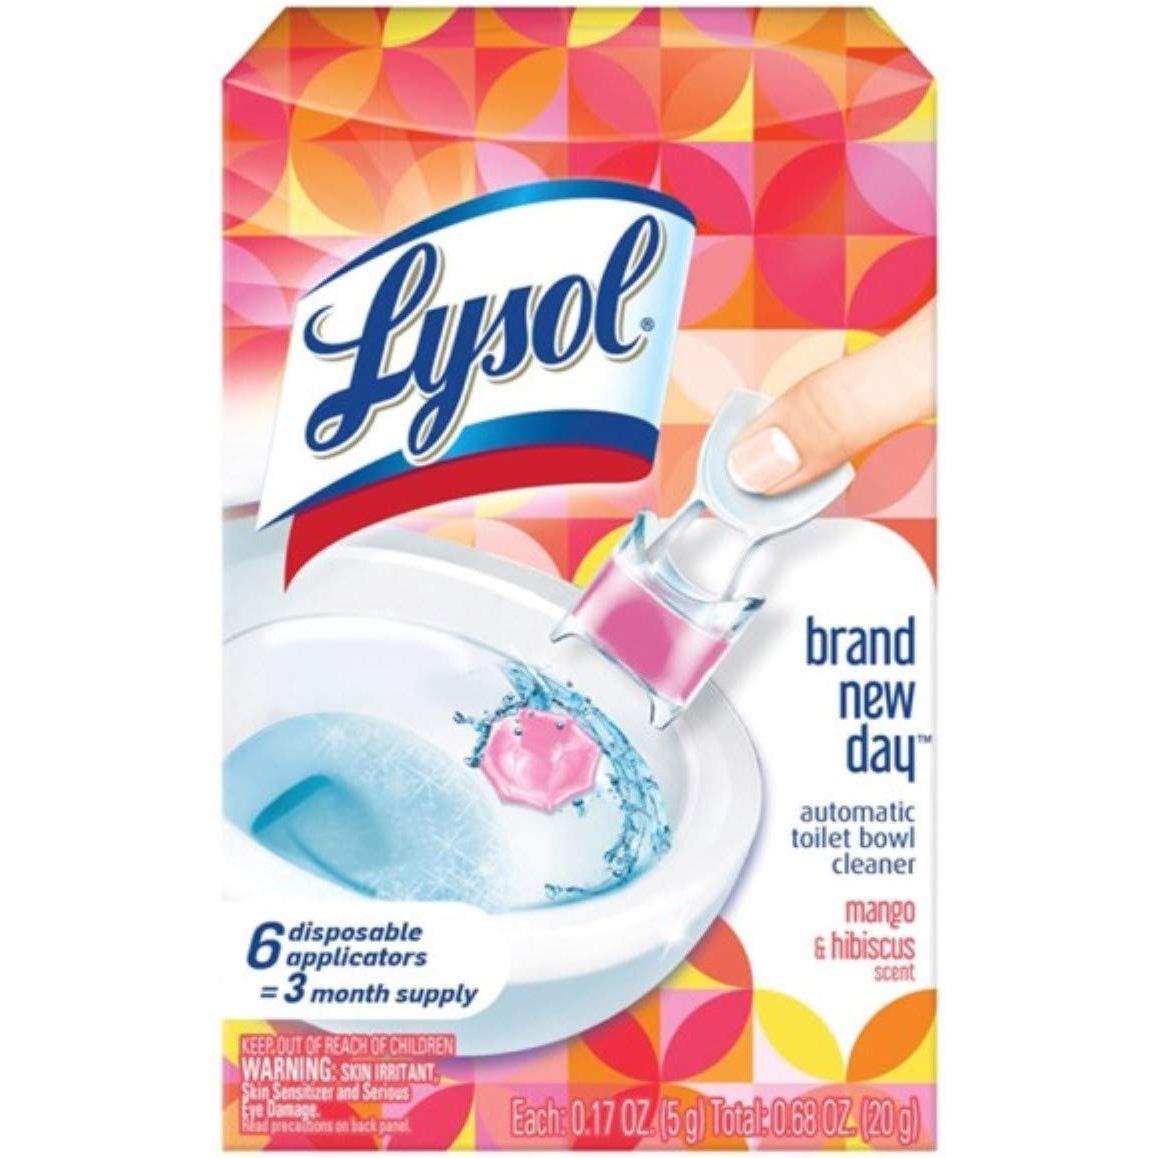 6 Lysol Automatic Toilet Bowl Cleaner for $3.97